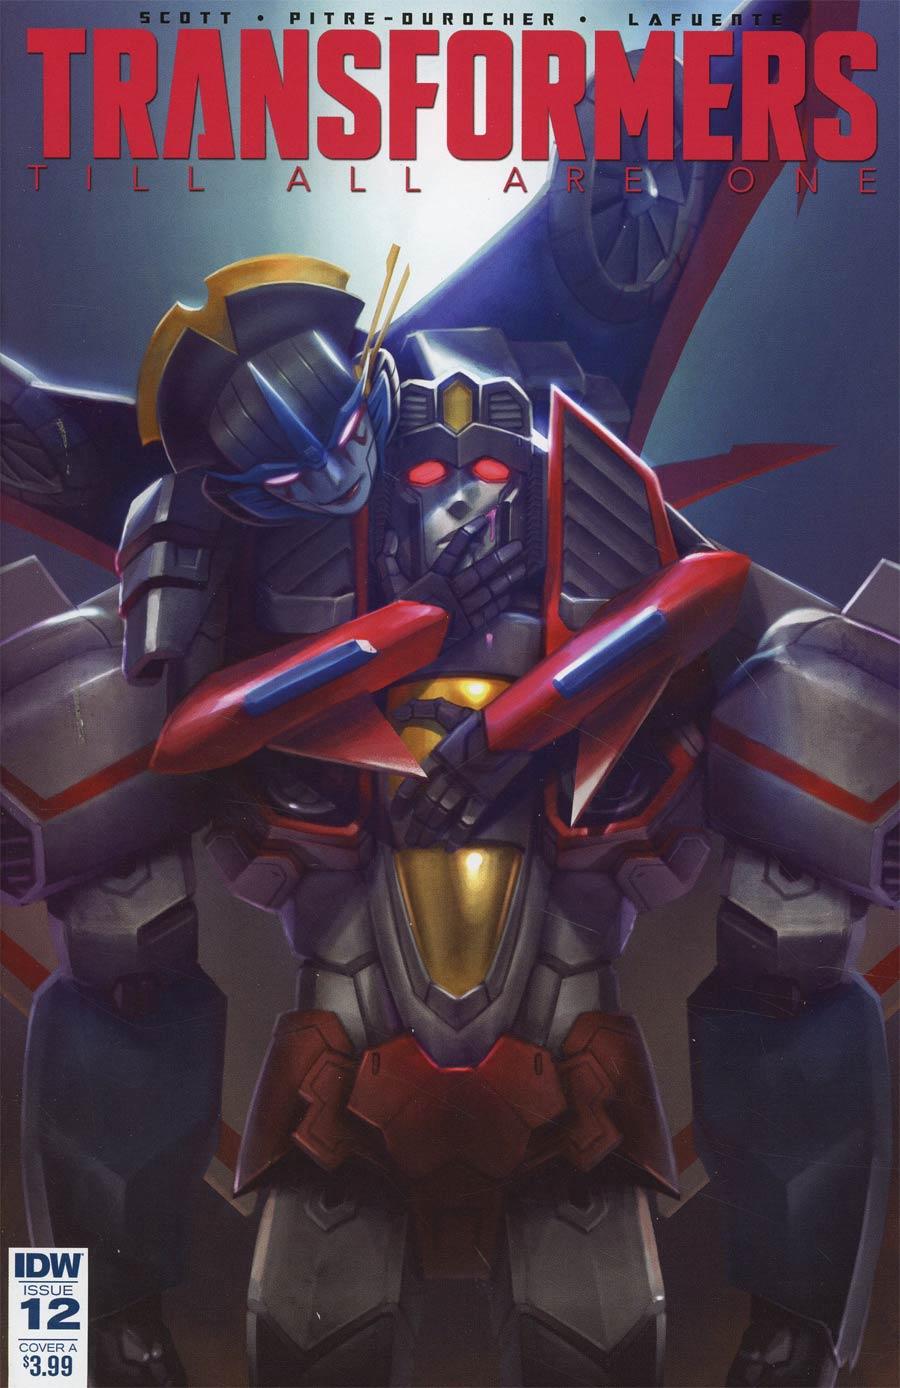 Transformers Till All Are One Vol. 1 #12